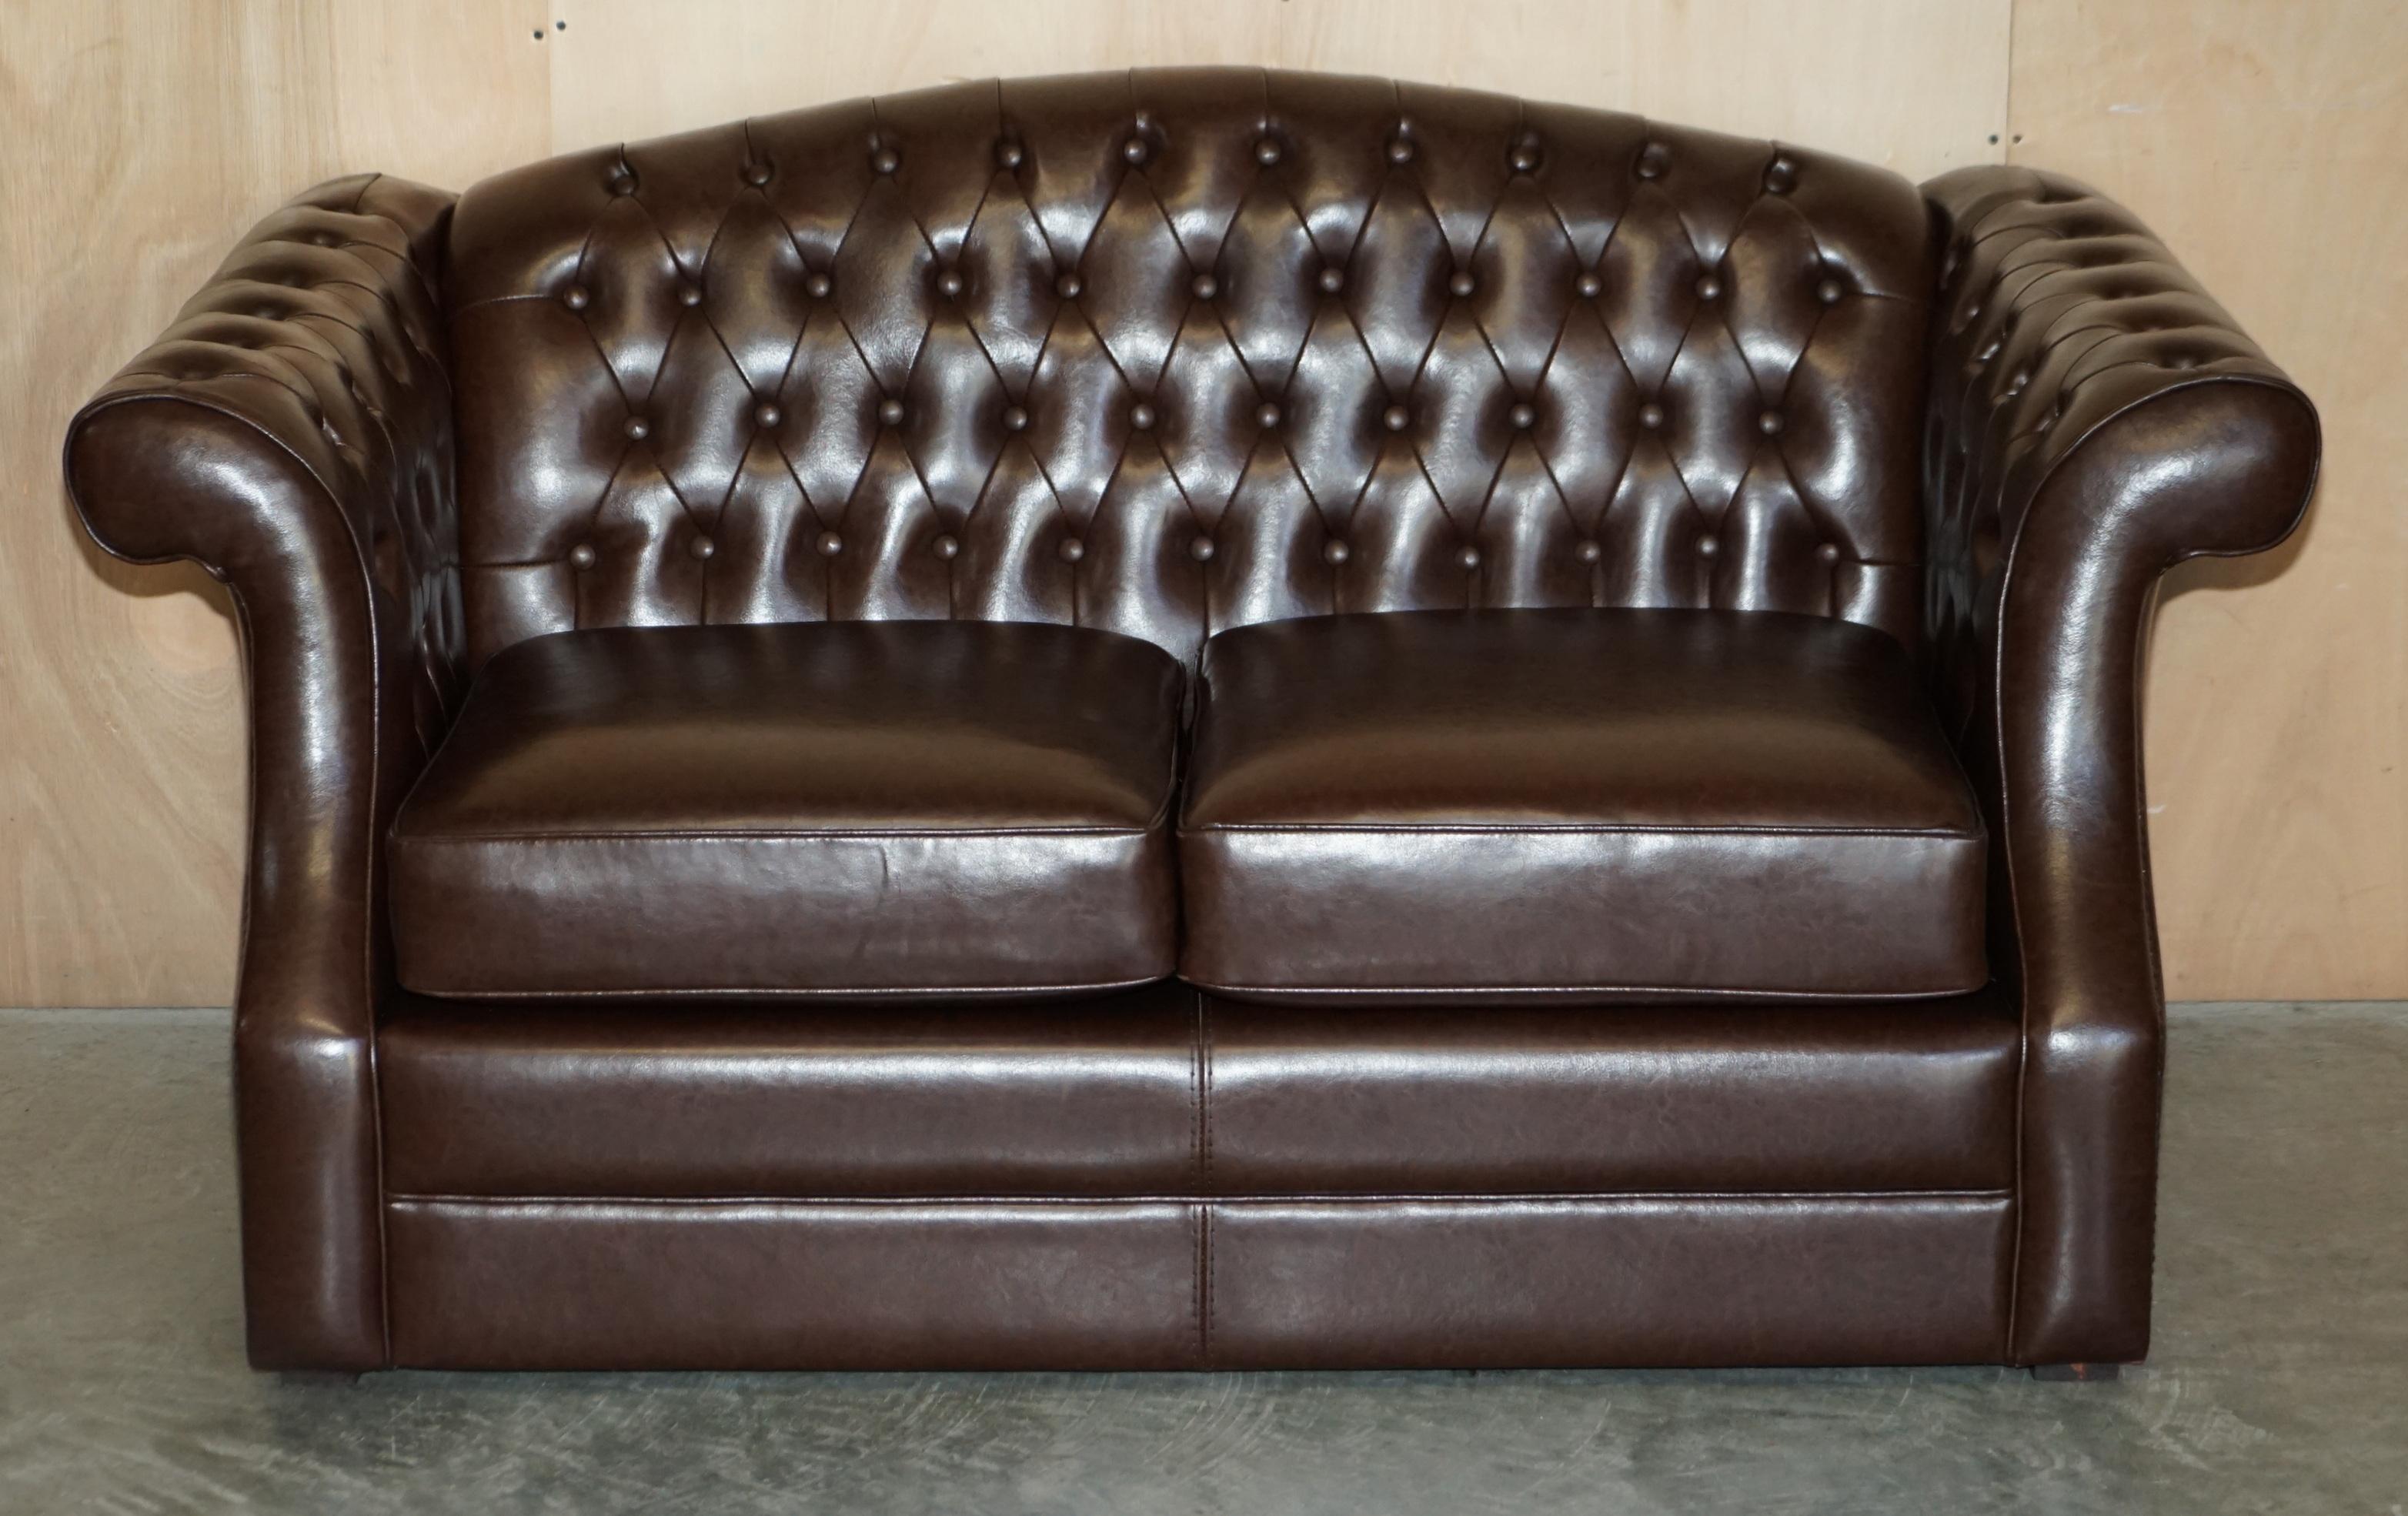 English Vintage Brown Leather Chesterfield Pair of Armchairs & Two Seat Sofa Suite